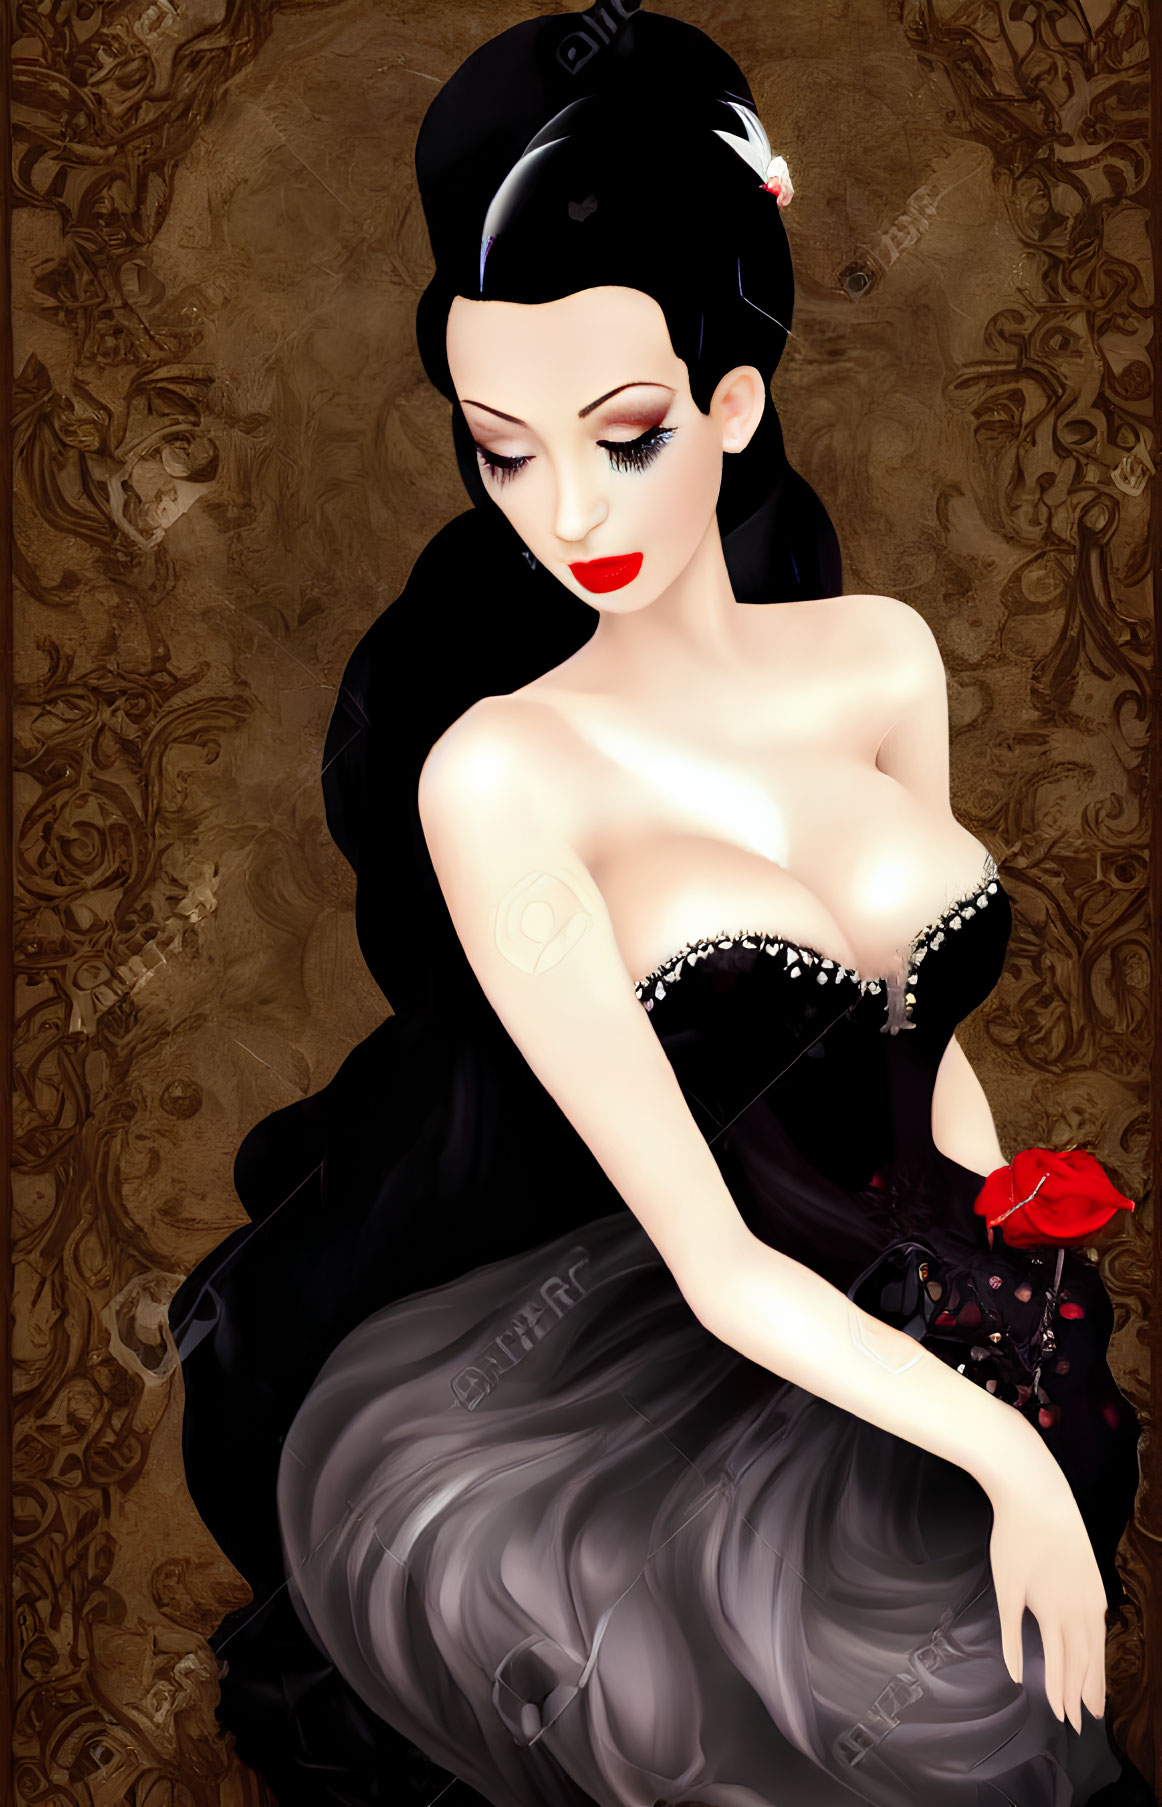 Illustration of woman in black gown with red rose on patterned background